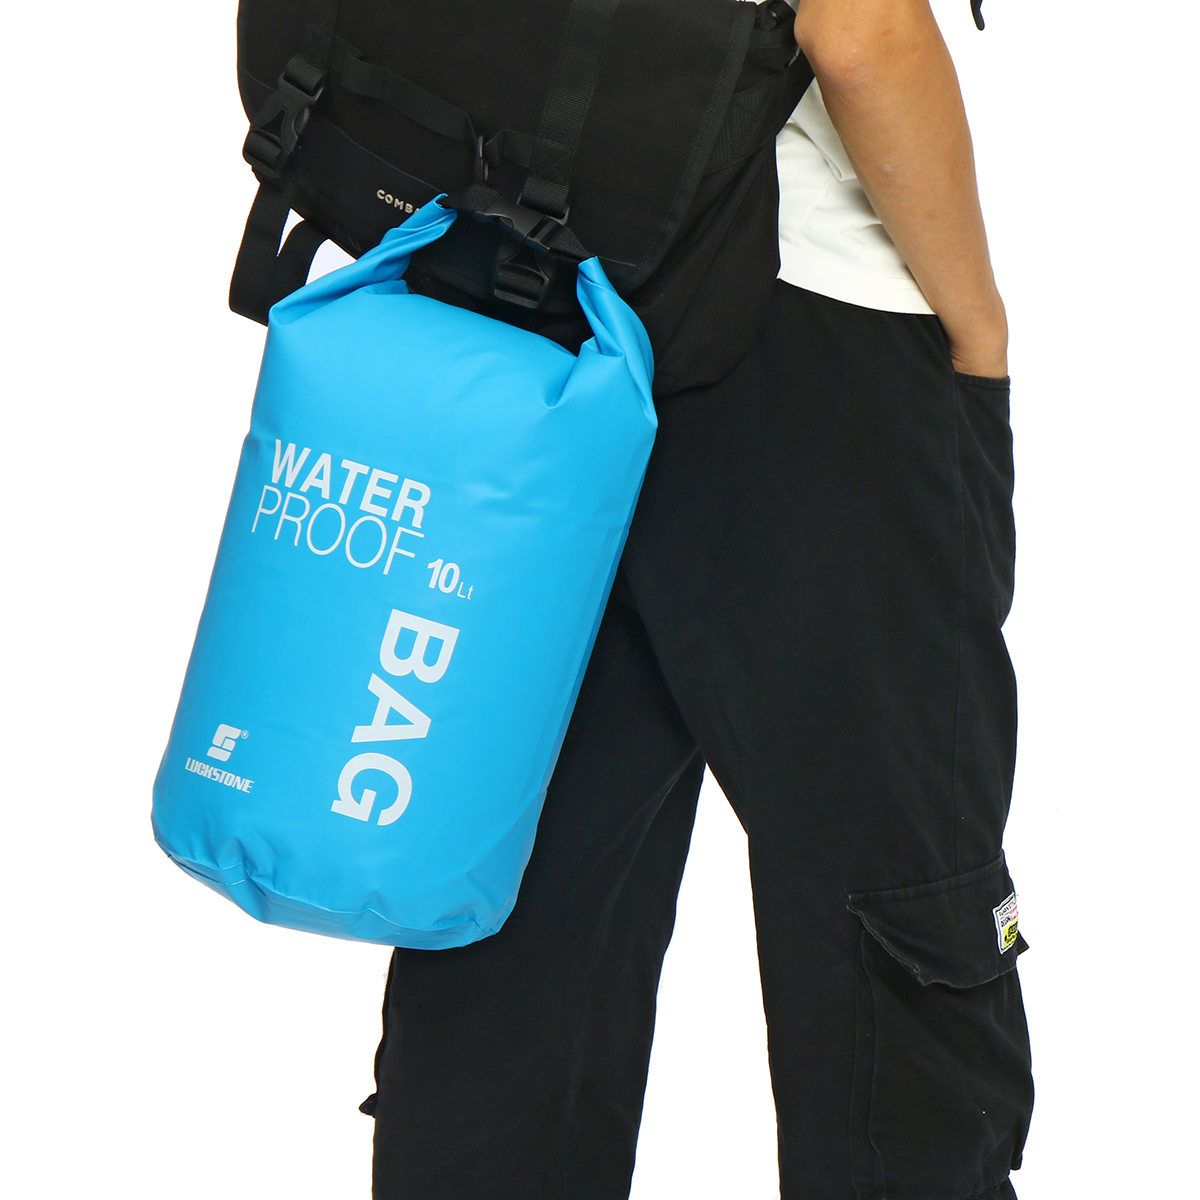 10L-Outdoor-Swimming-Air-Inflation-Floating-Mobile-Phone-Camera-Storage-PVC-Waterproof-Bag-1820807-11